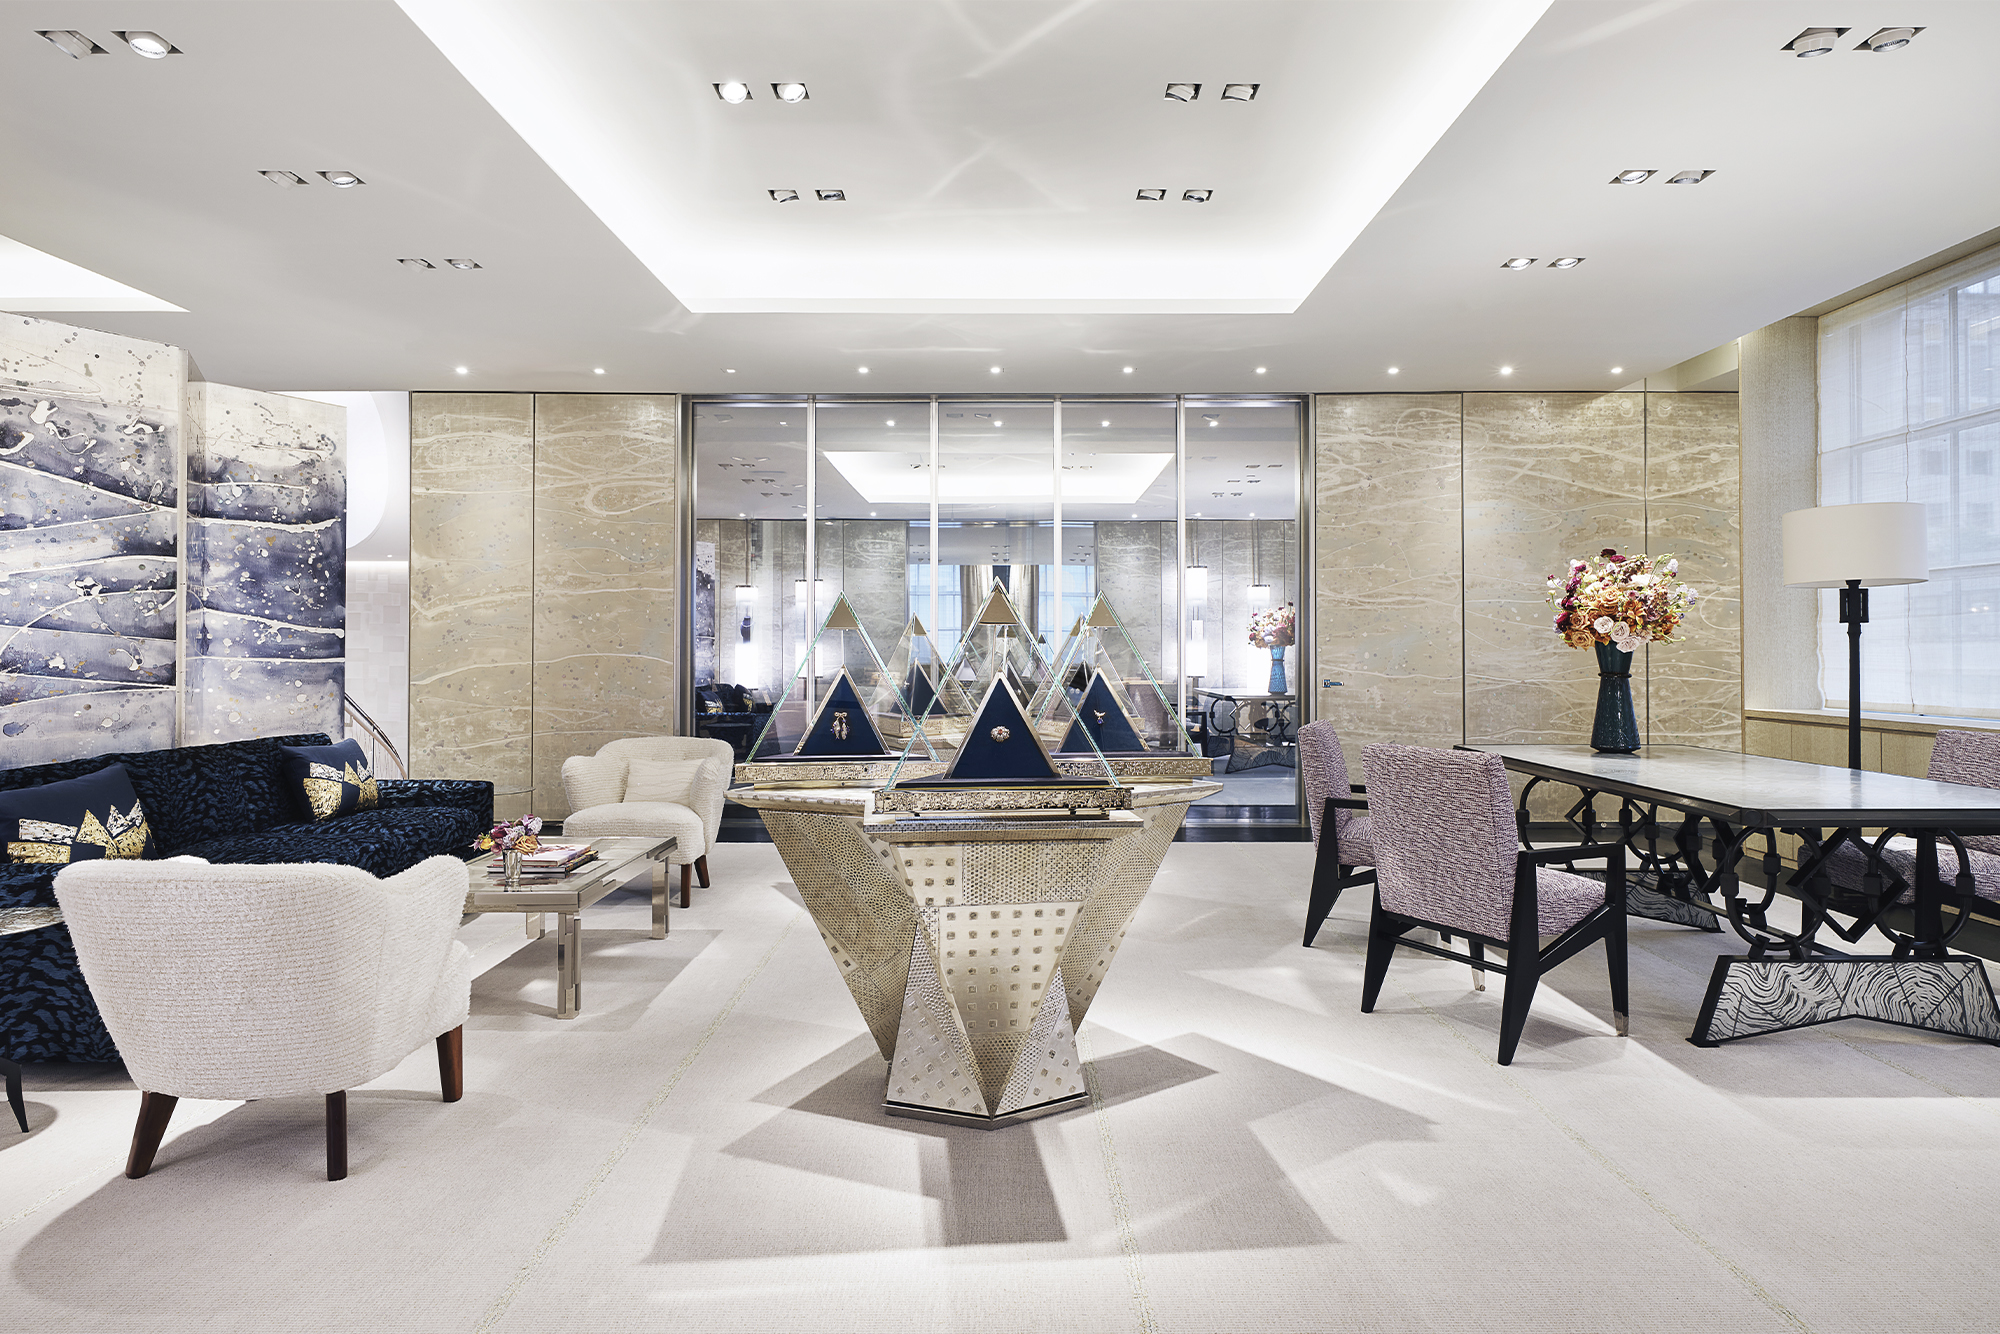 Tiffany & Co. The Landmark interior with white tile floor and white-lit ceilings and table